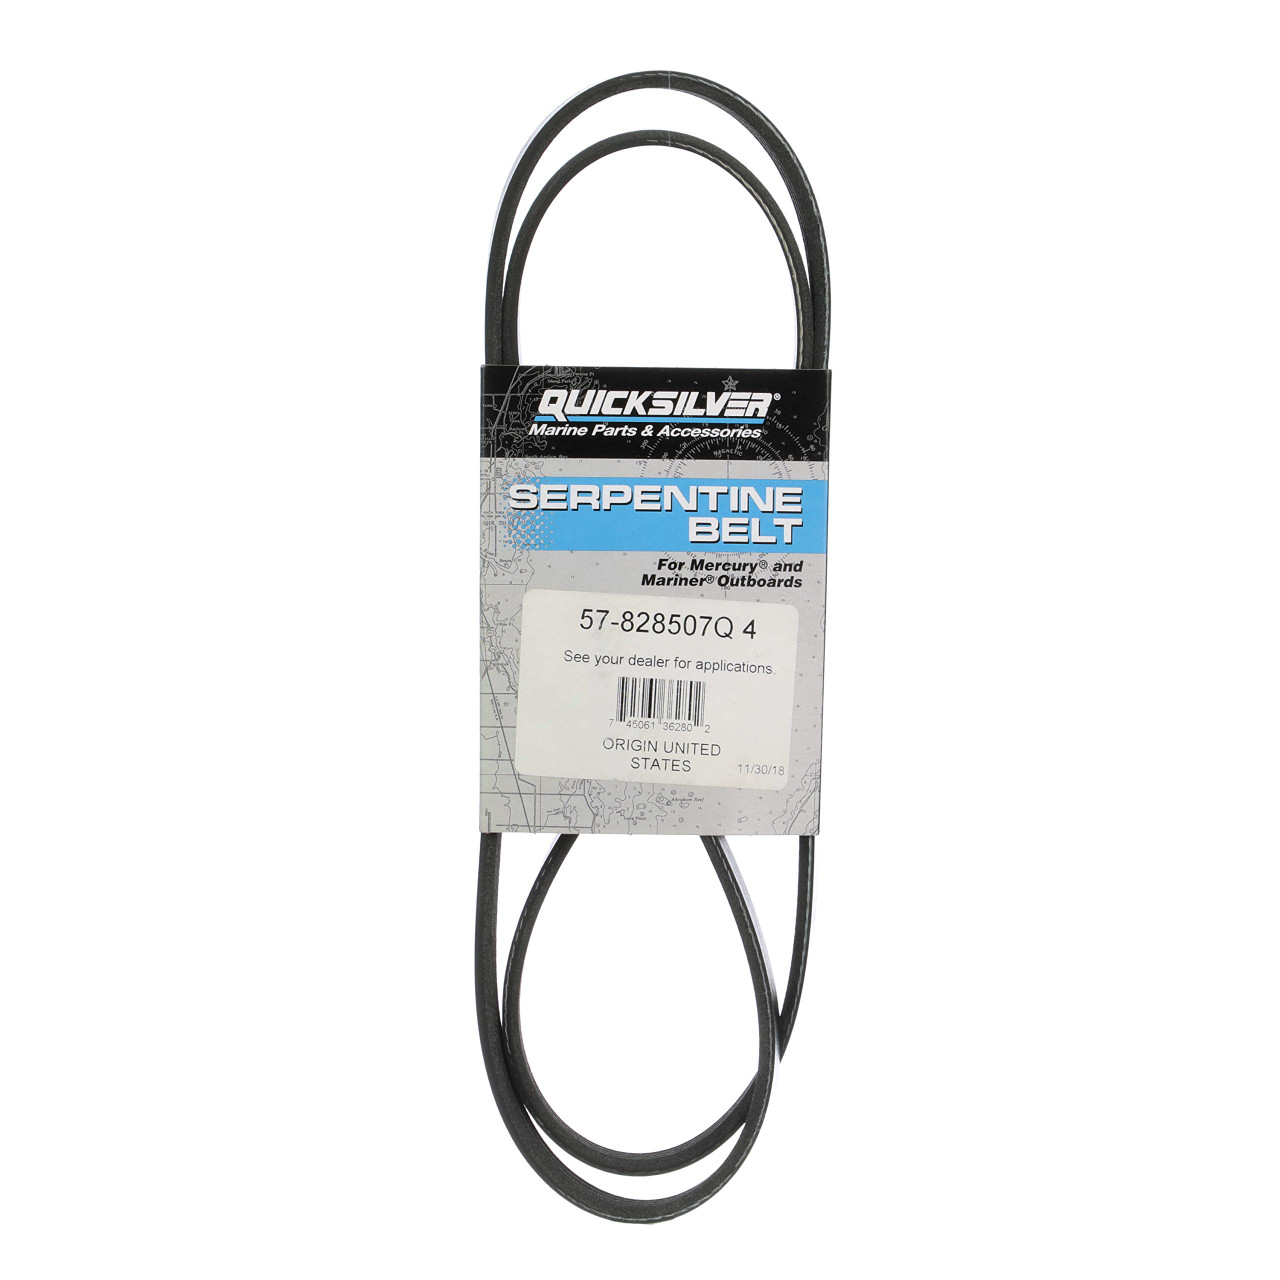 Genuine Timing belt for Mercury outboards